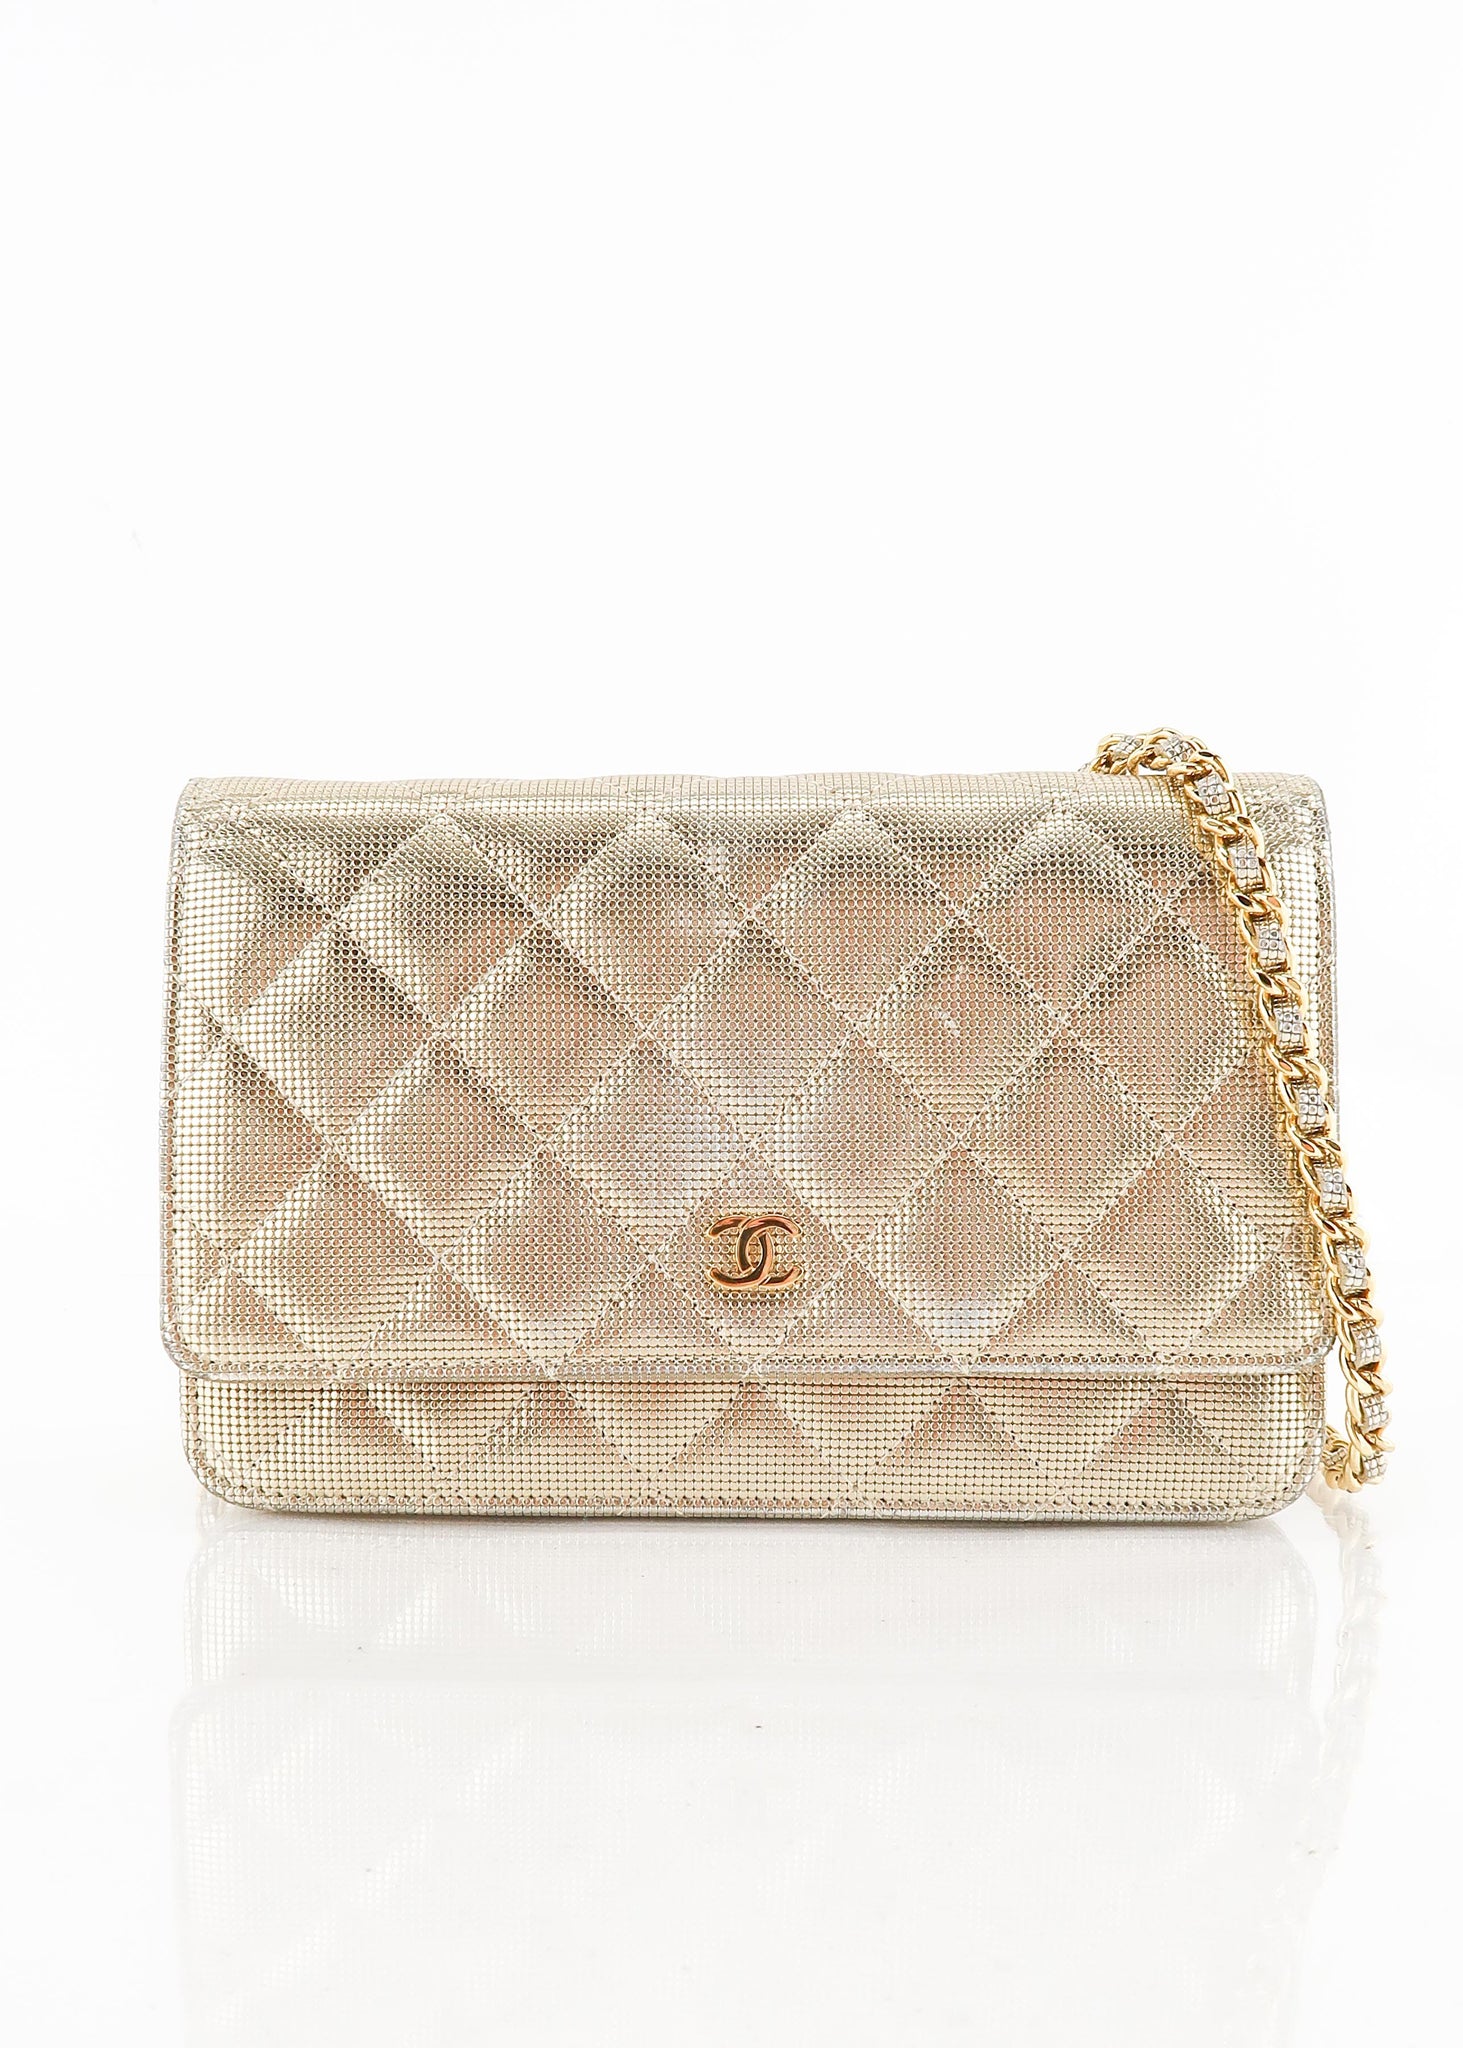 Chanel limited pearls strap WOC in black lambskin with silver hardware.